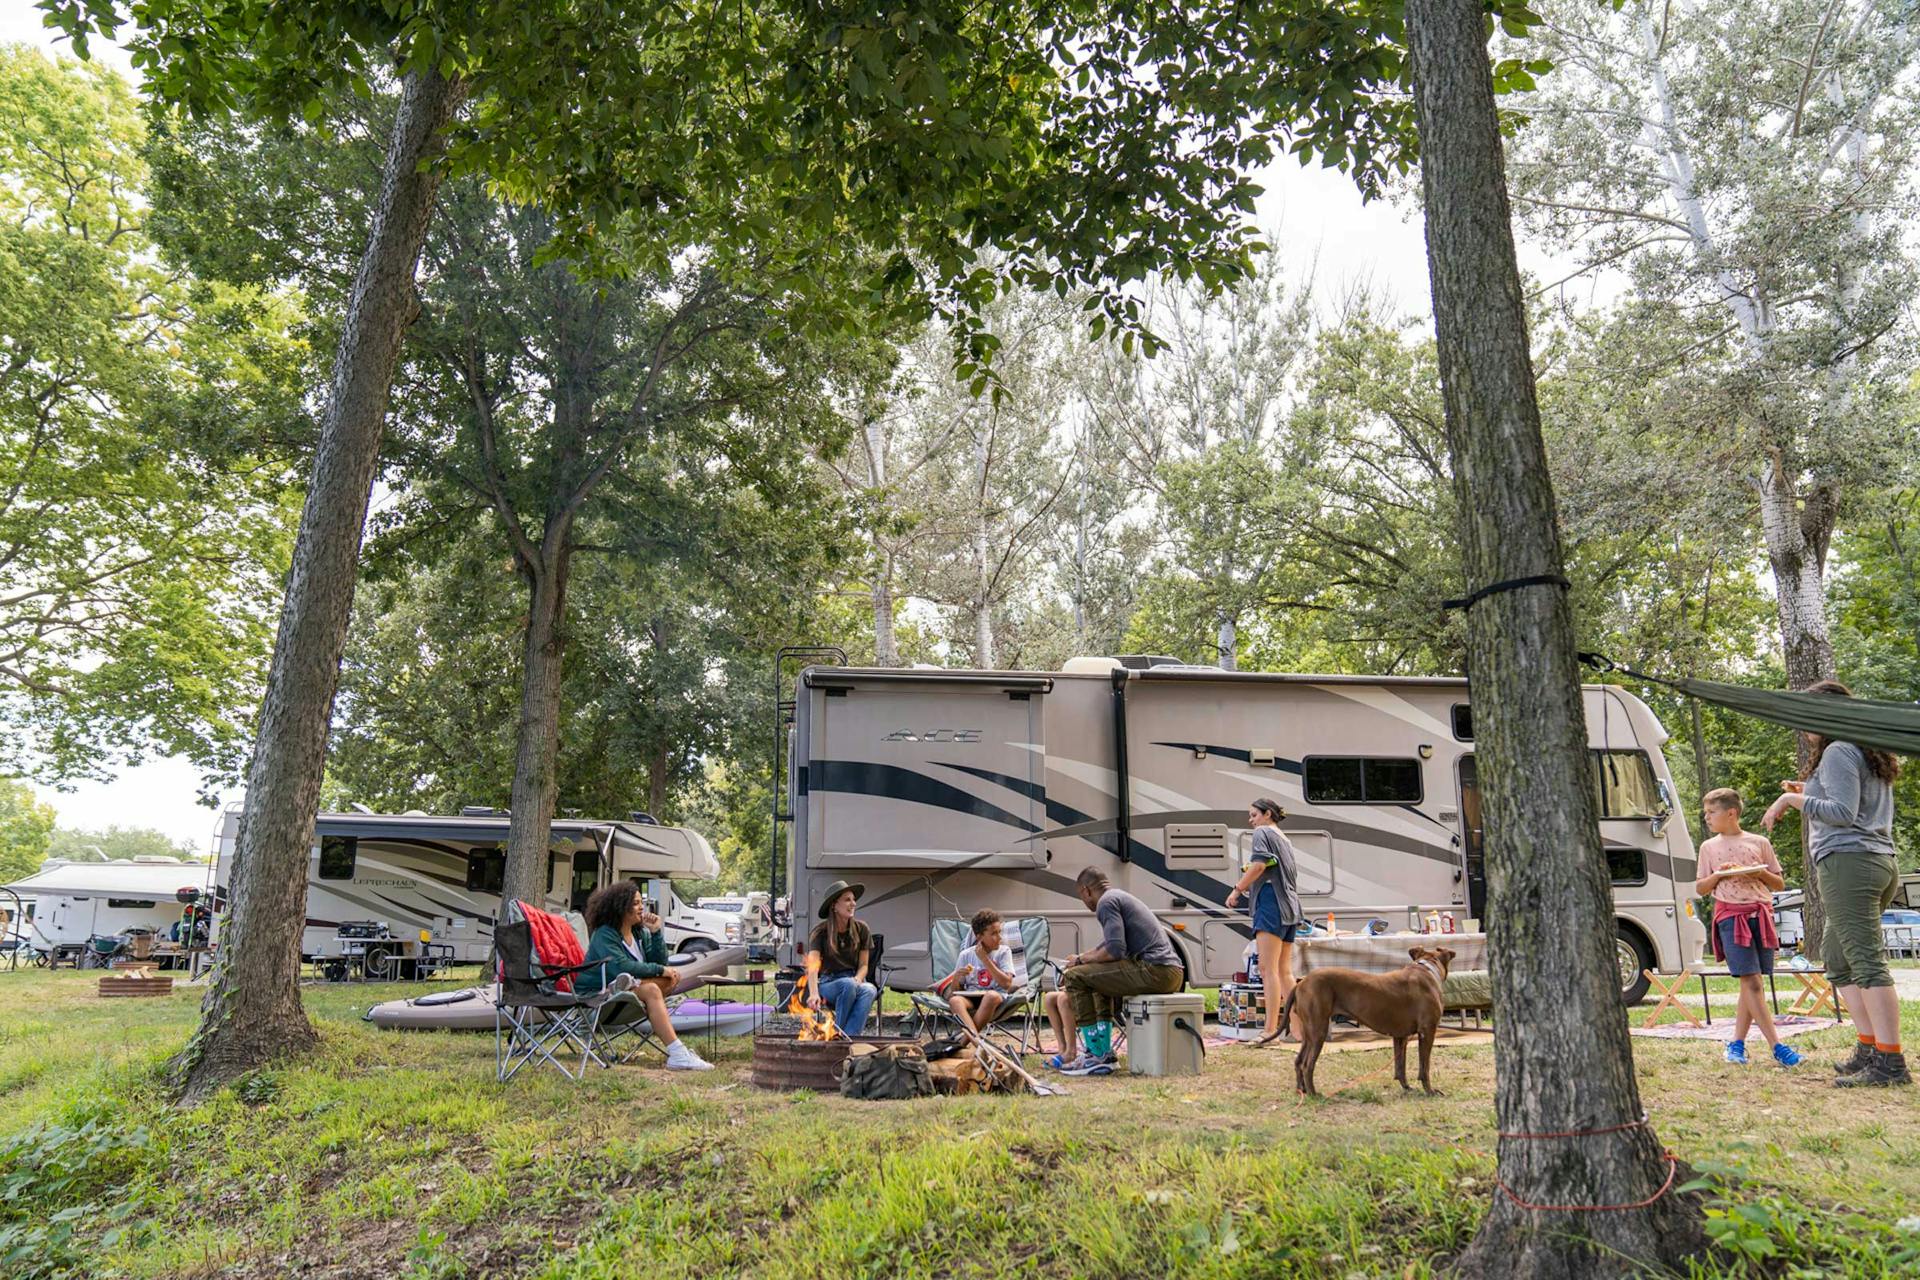 6 Ways to Connect With Your Neighbors While Camping